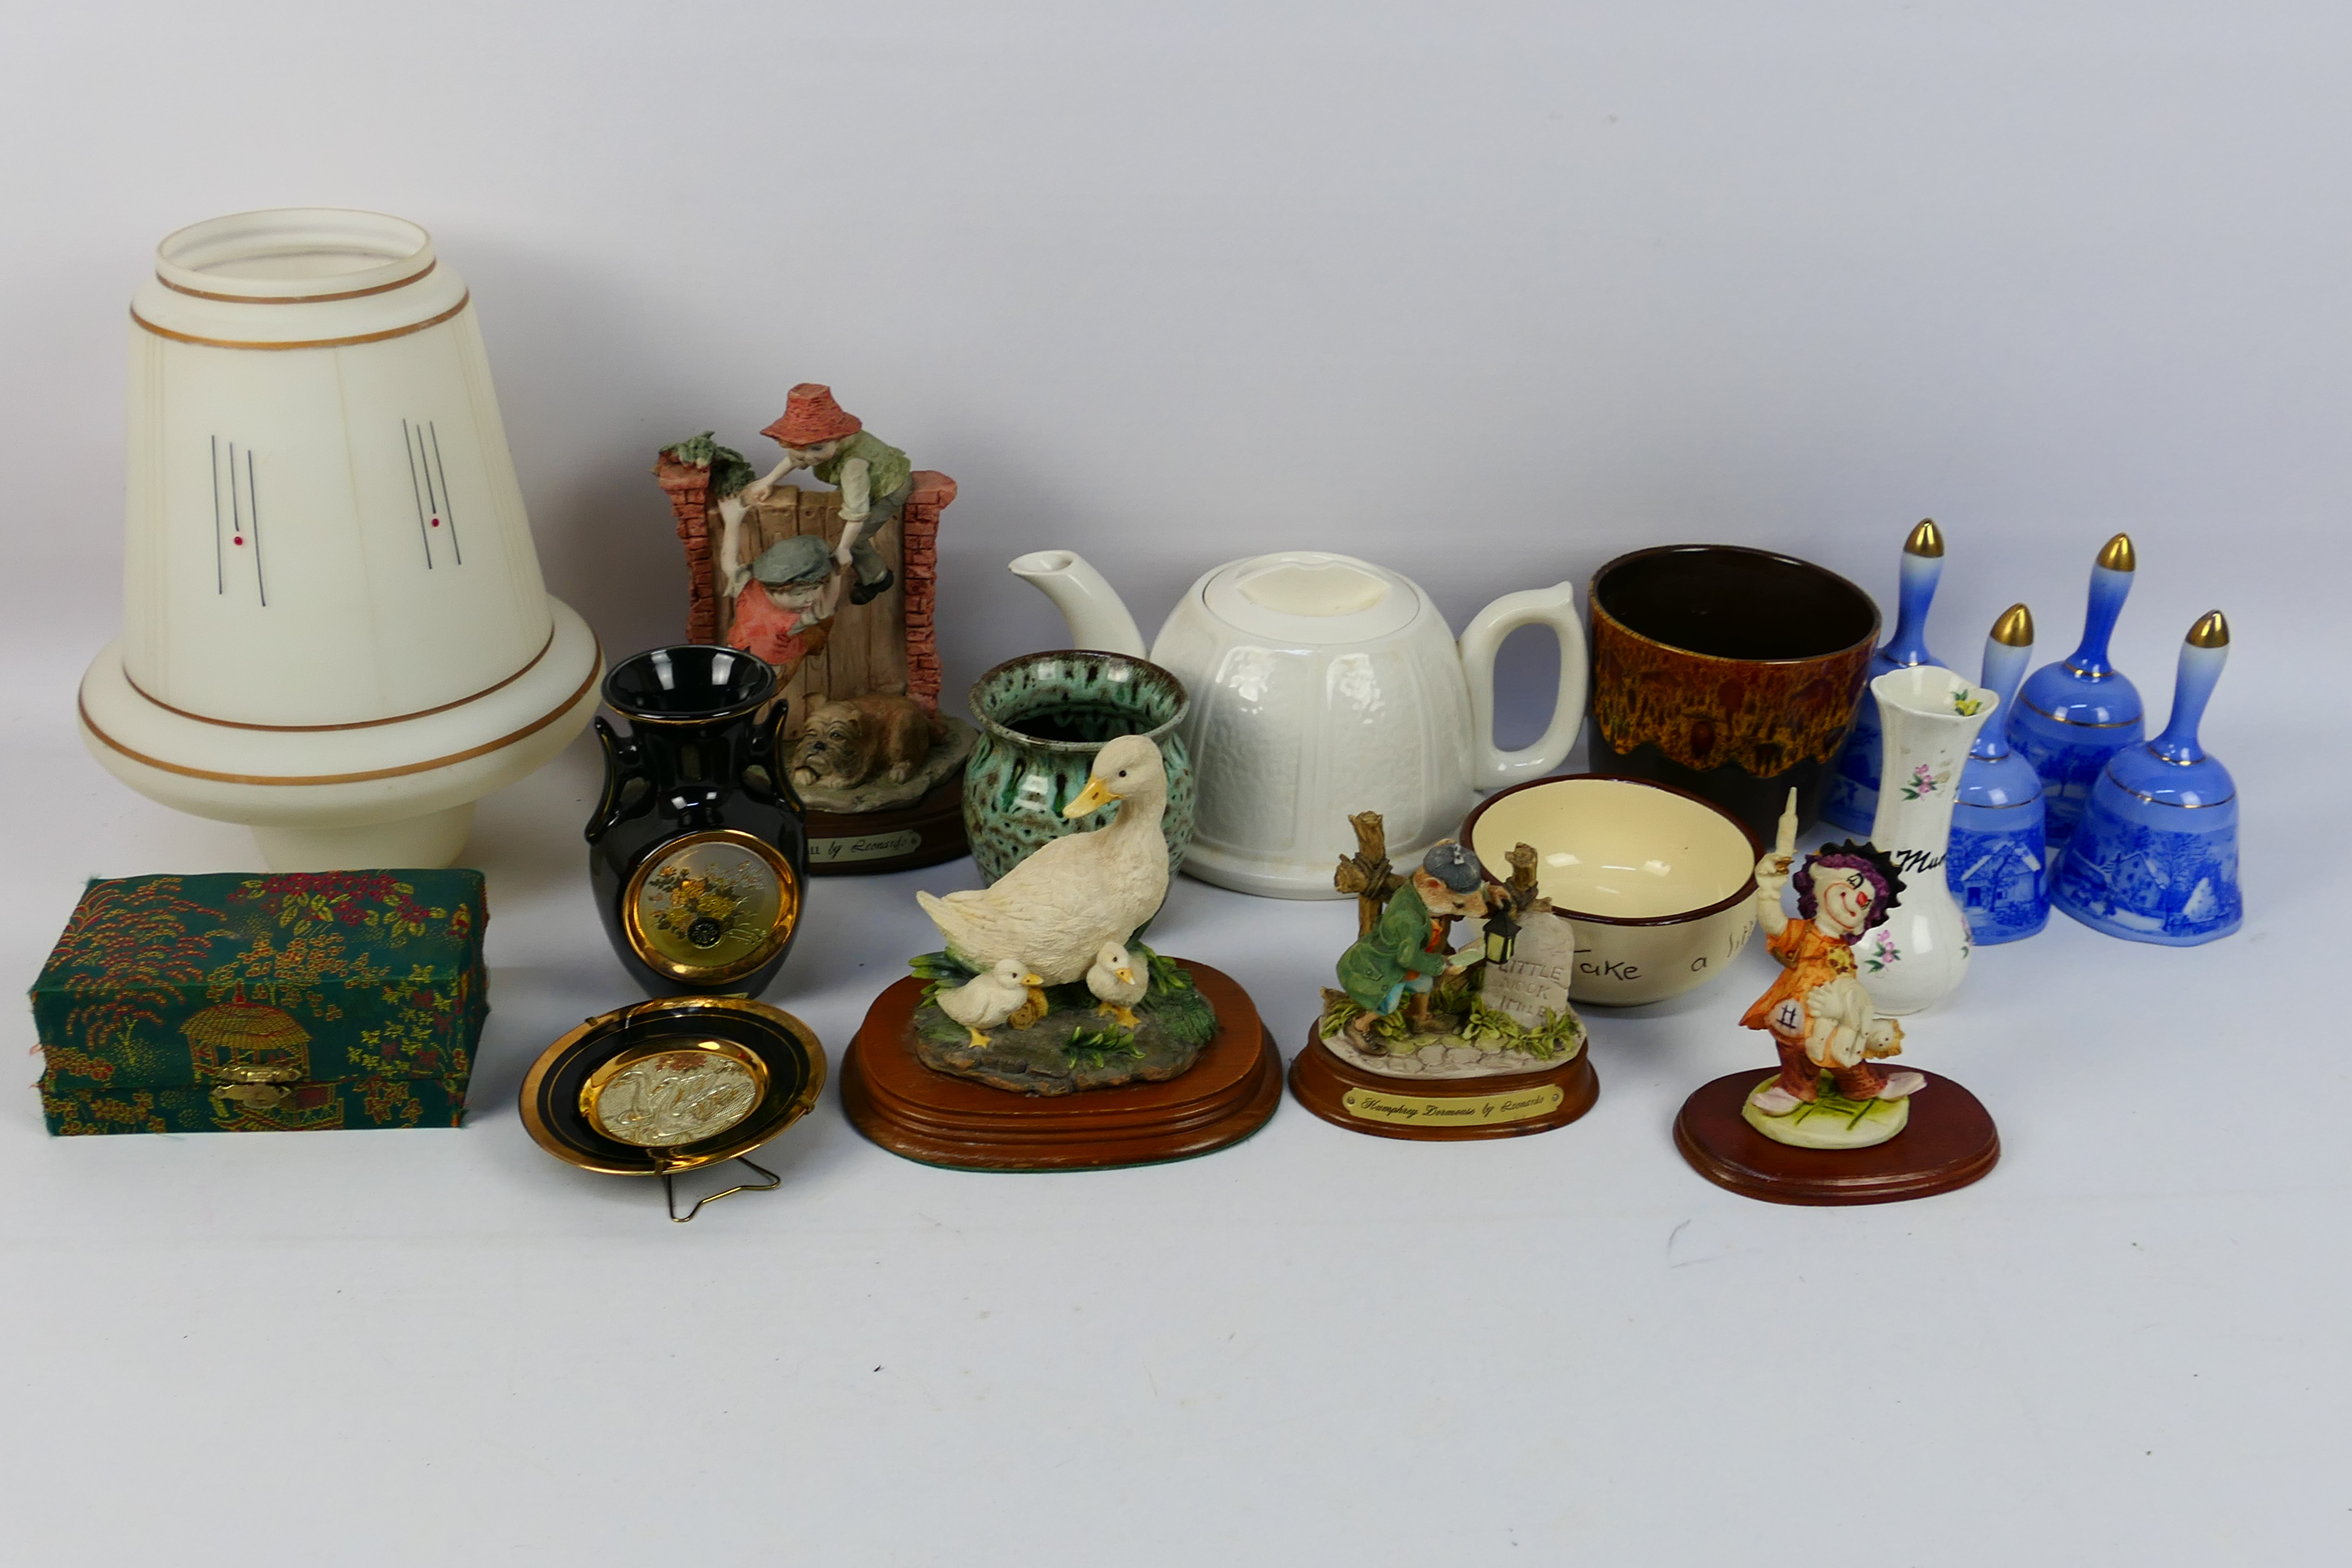 Leonardo Collection, Chokin, Beverley Tableware, Other - A collection of ceramics,